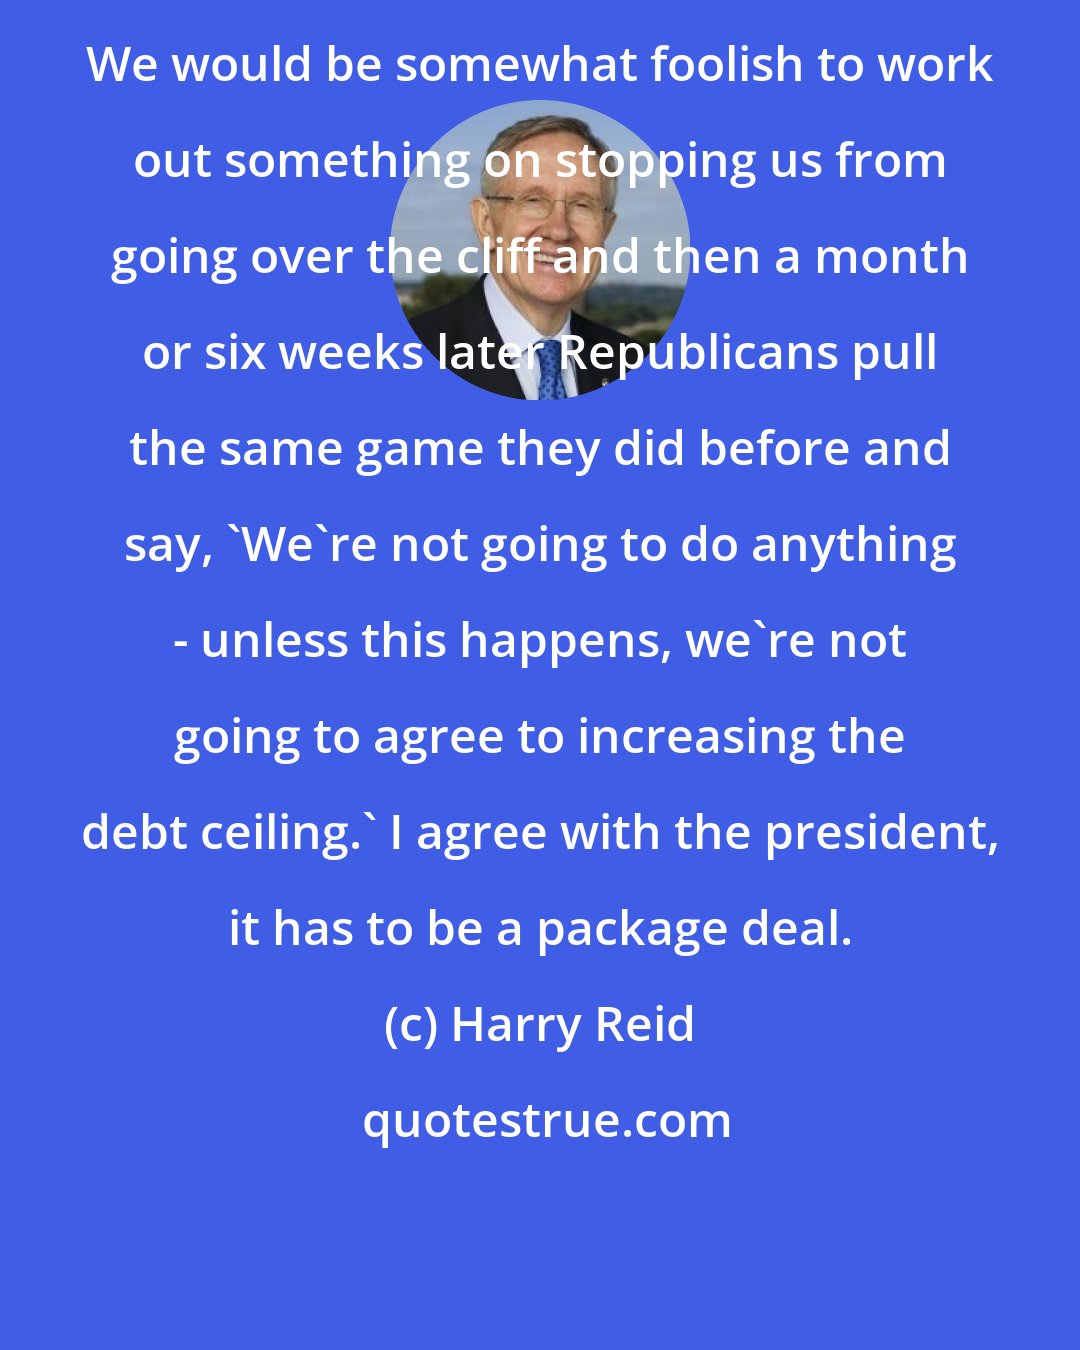 Harry Reid: We would be somewhat foolish to work out something on stopping us from going over the cliff and then a month or six weeks later Republicans pull the same game they did before and say, 'We're not going to do anything - unless this happens, we're not going to agree to increasing the debt ceiling.' I agree with the president, it has to be a package deal.